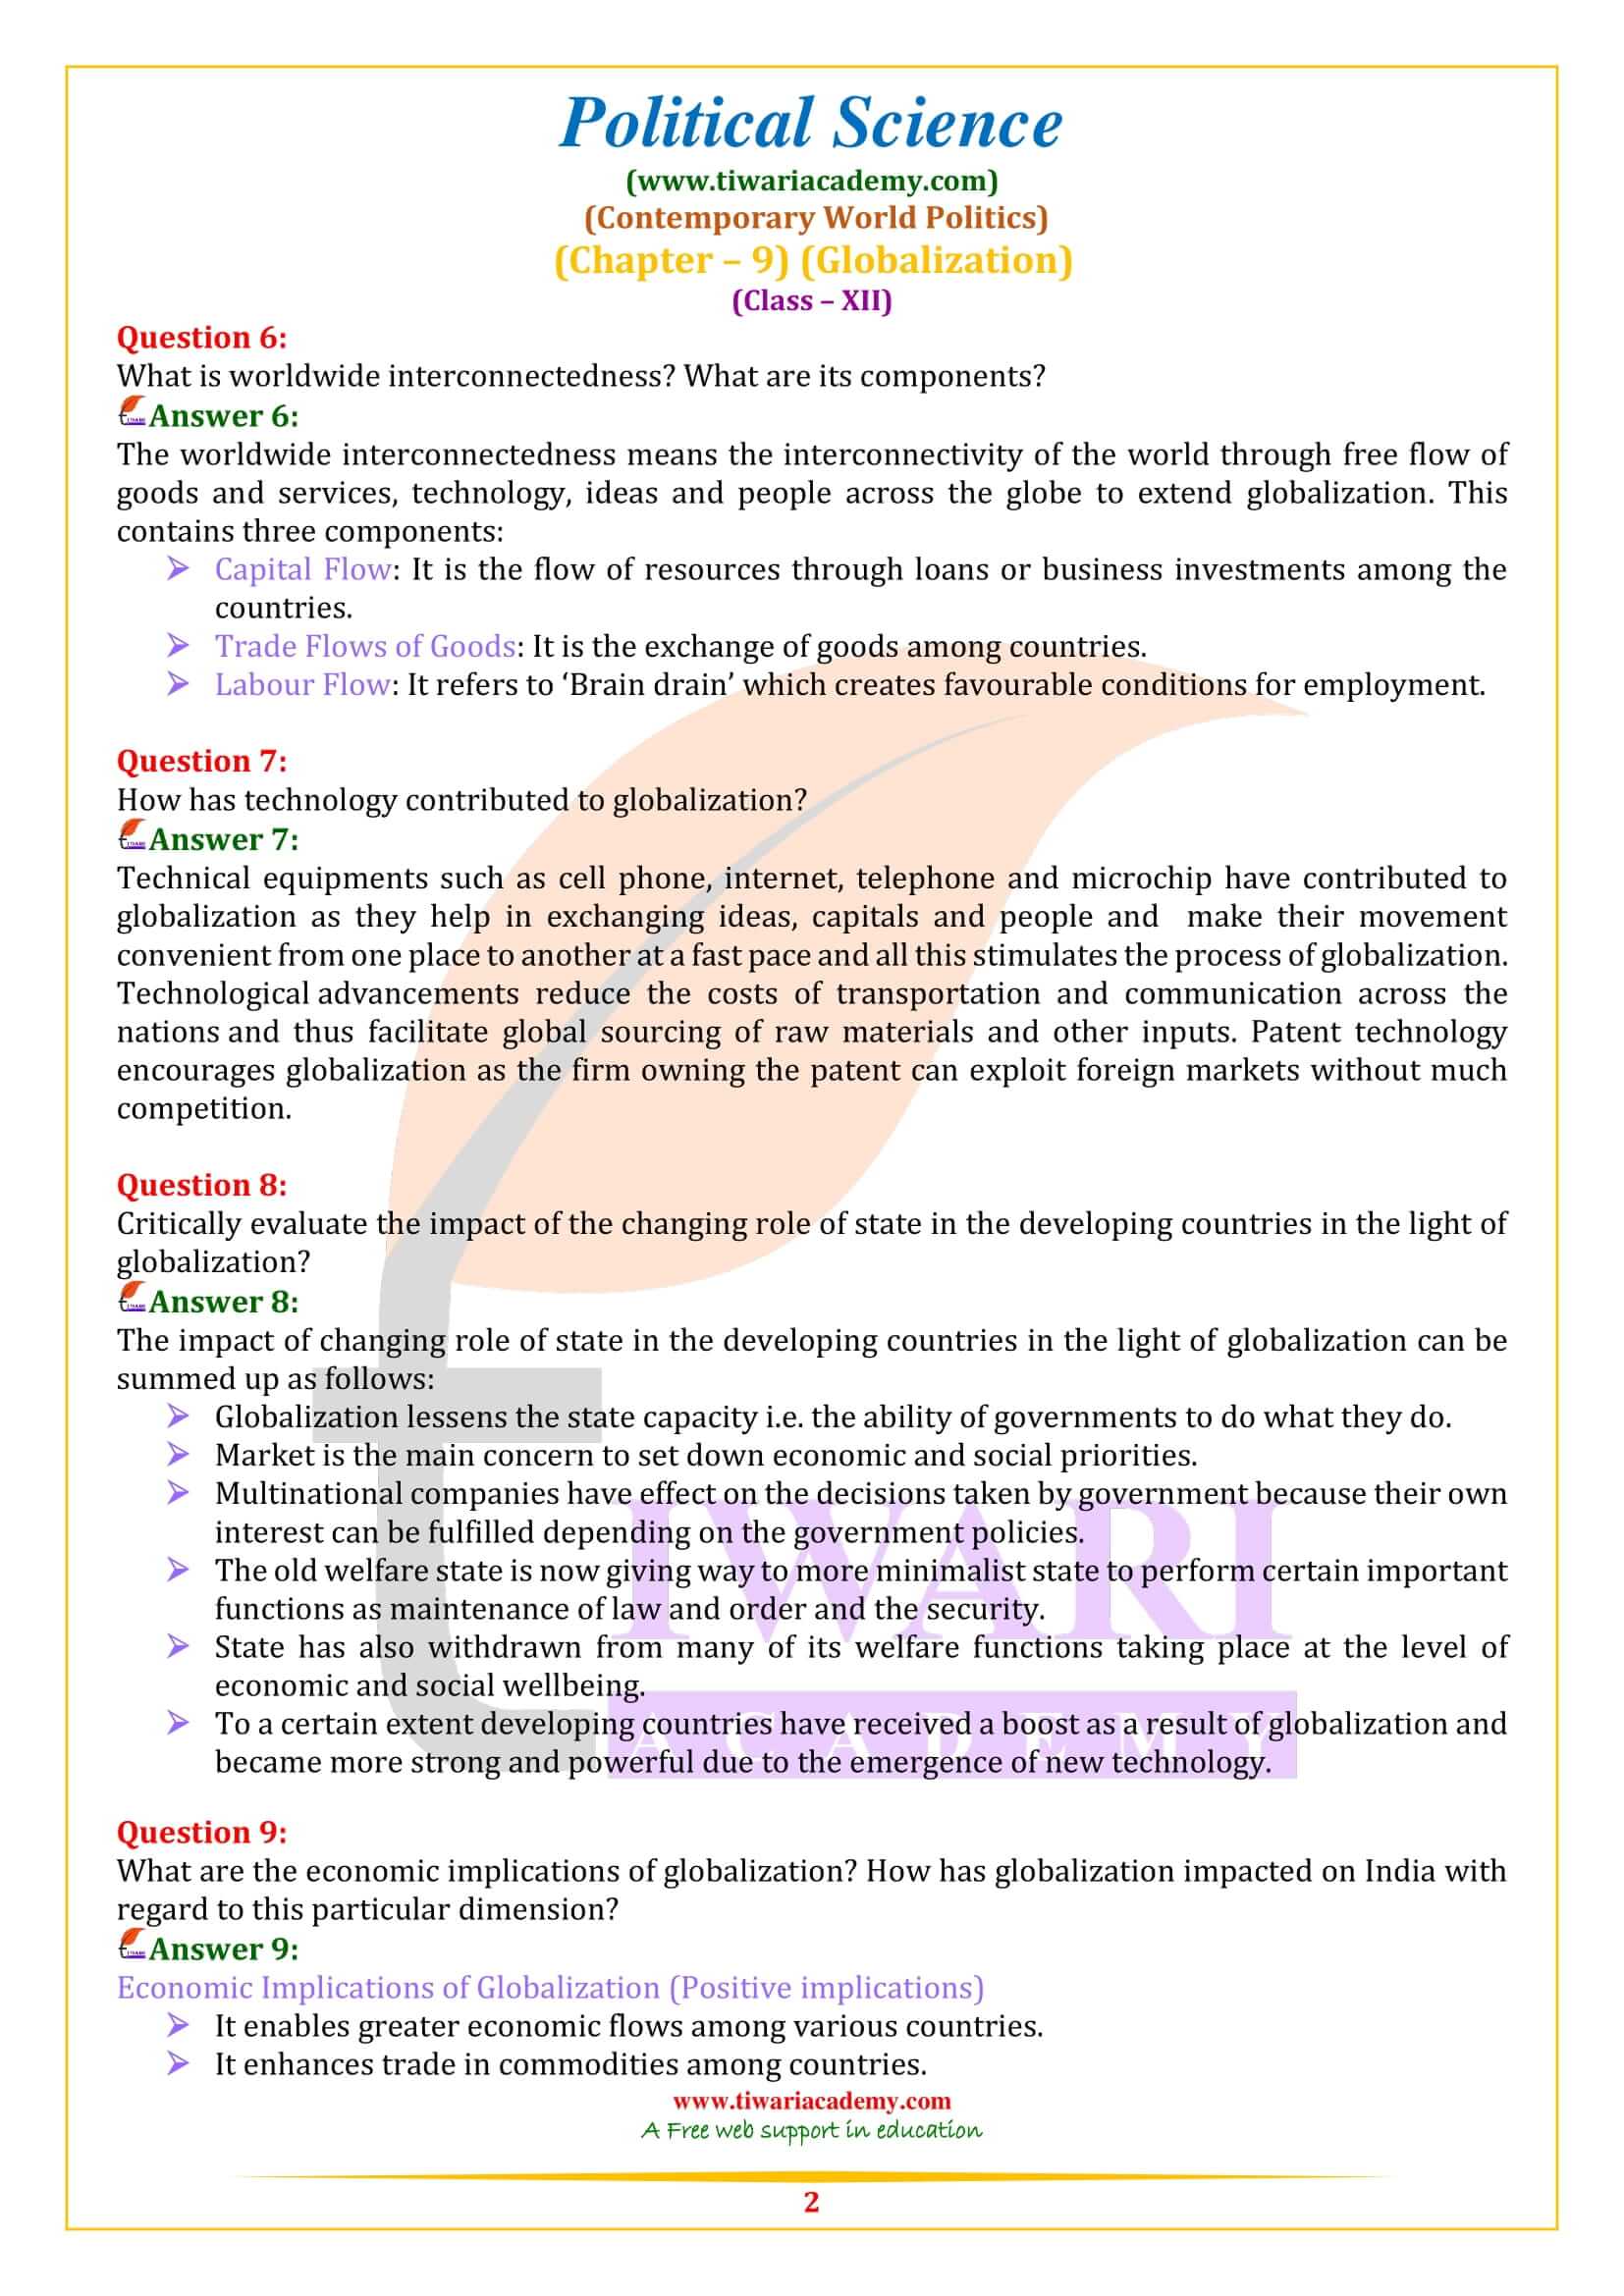 NCERT Solutions for Class 12 Political Science Chapter 9